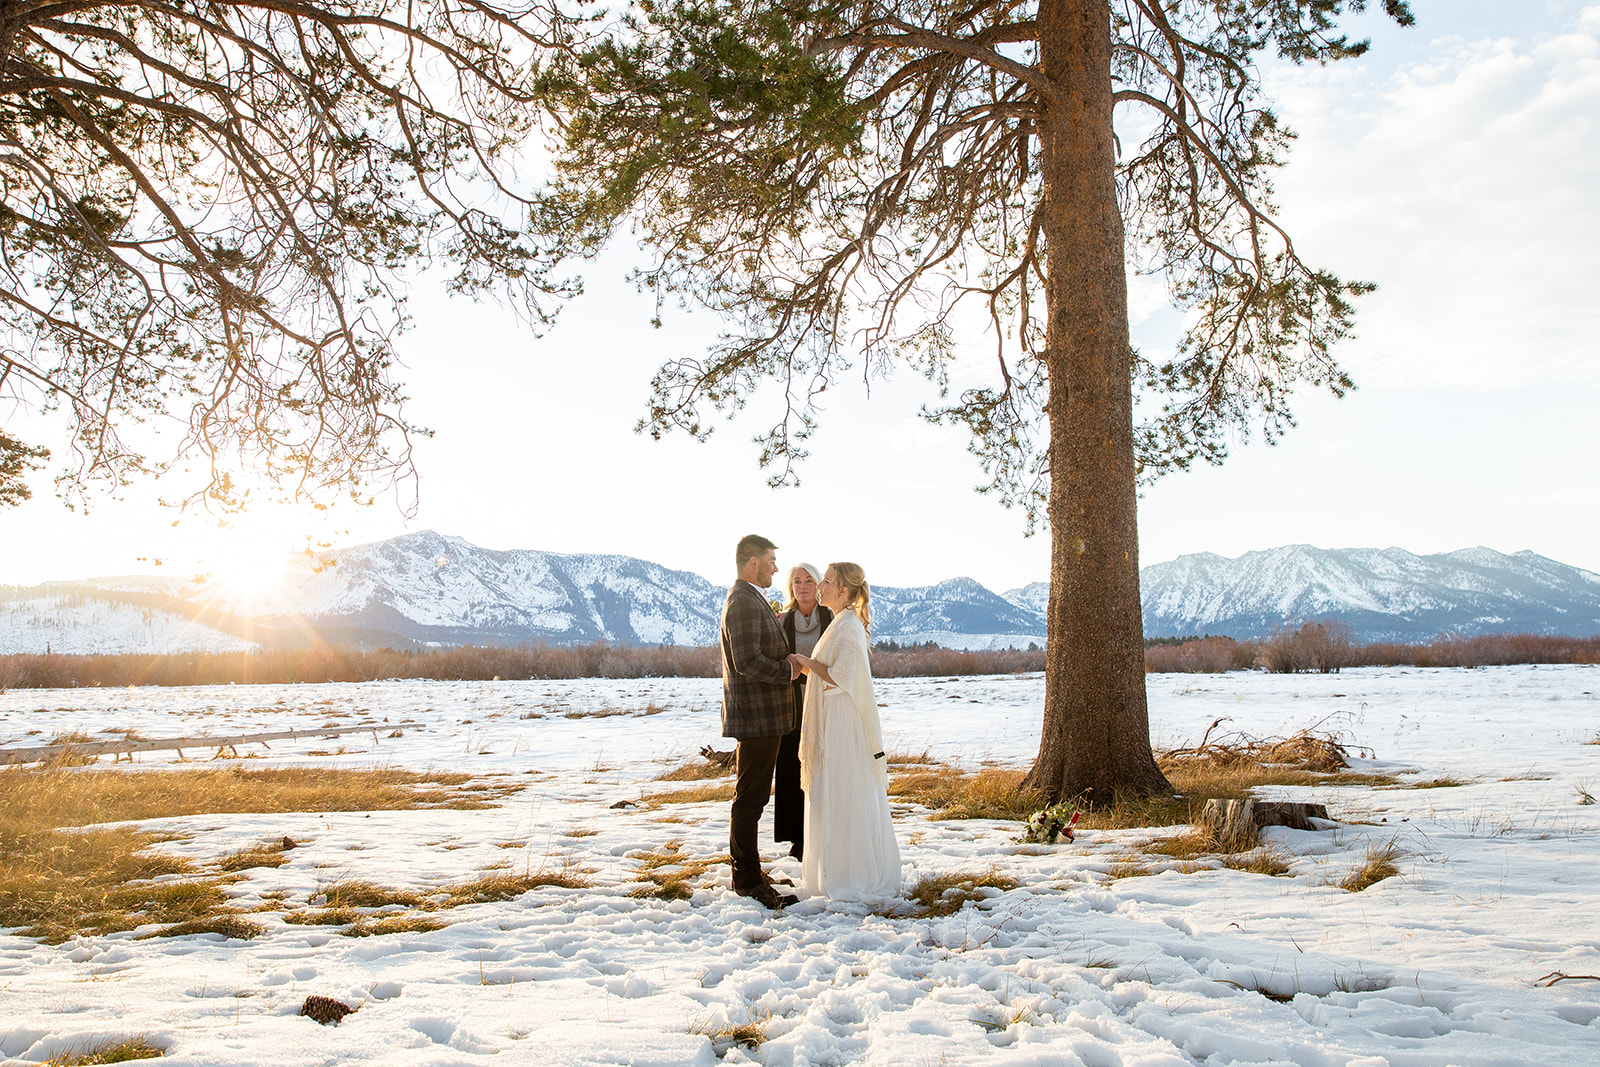 Eloping couple exchanging vows during intimate ceremony in South Lake Tahoe, CA